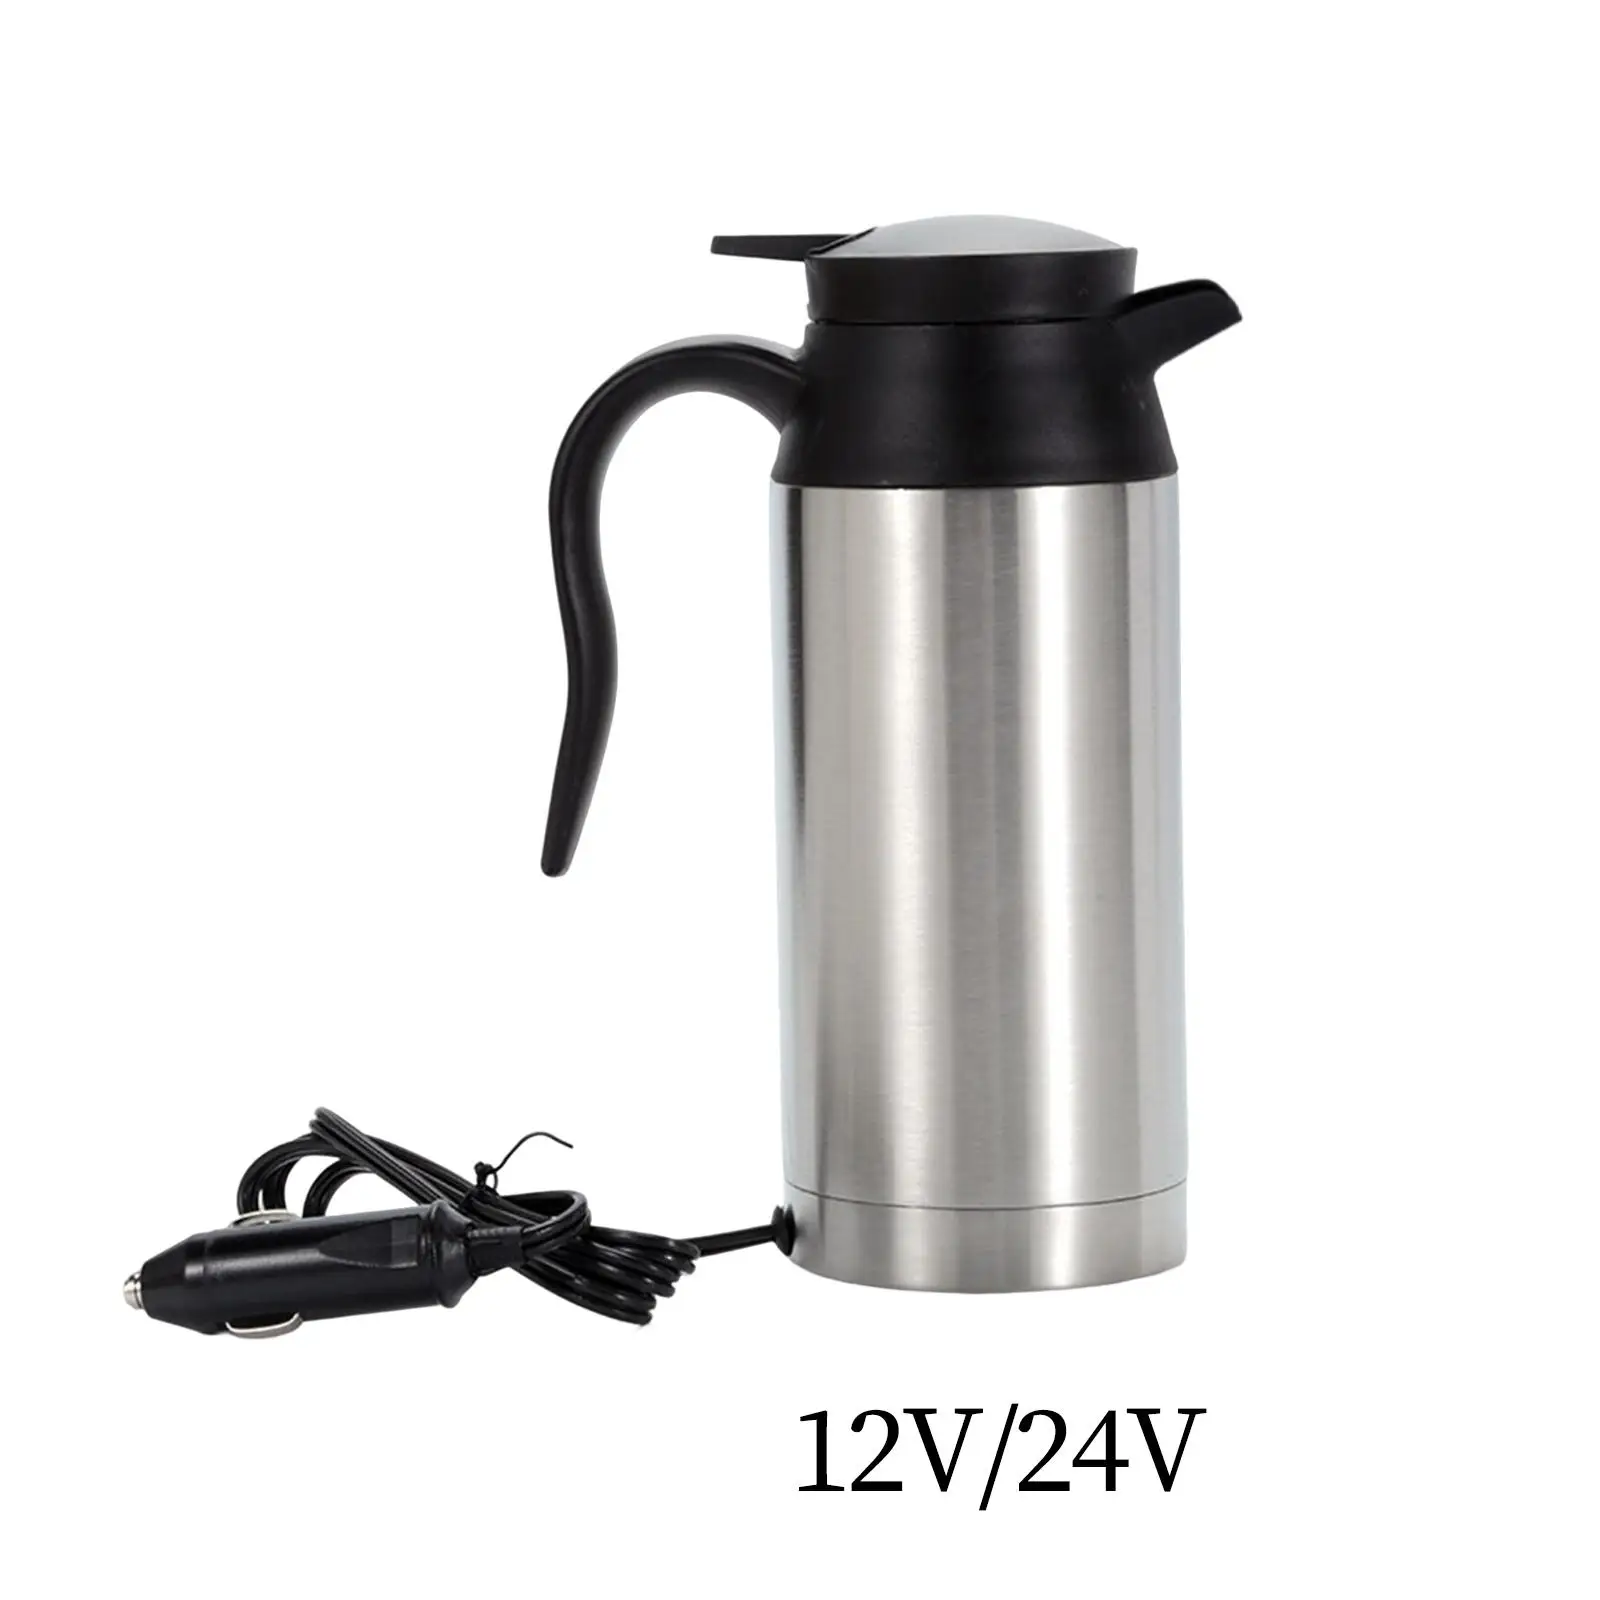 750ml Stainless Steel Electric Car Kettle Heating Cup Easily Clean Fits Most Car